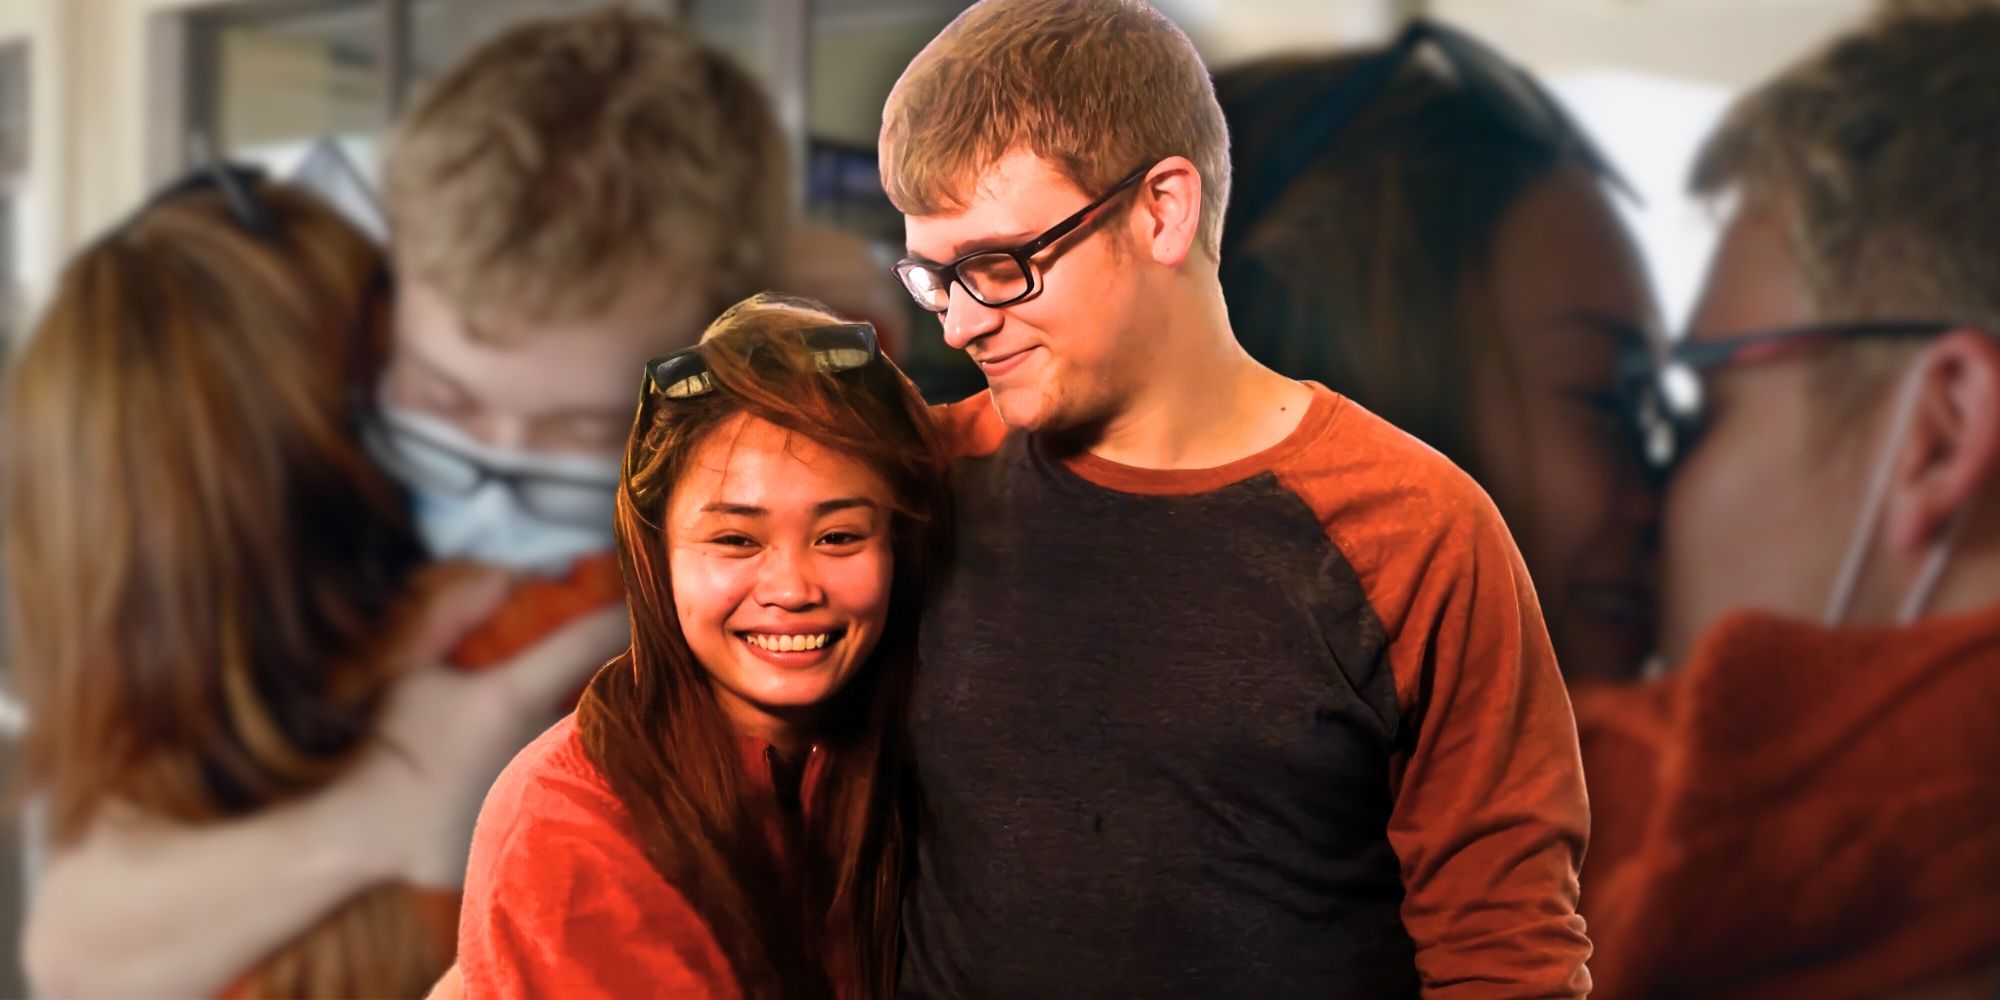 Montage of 90 Day Fiance's Brandan DeNuccio in brown shirt and Mary Demasu-ay in orange top smiling and embracing